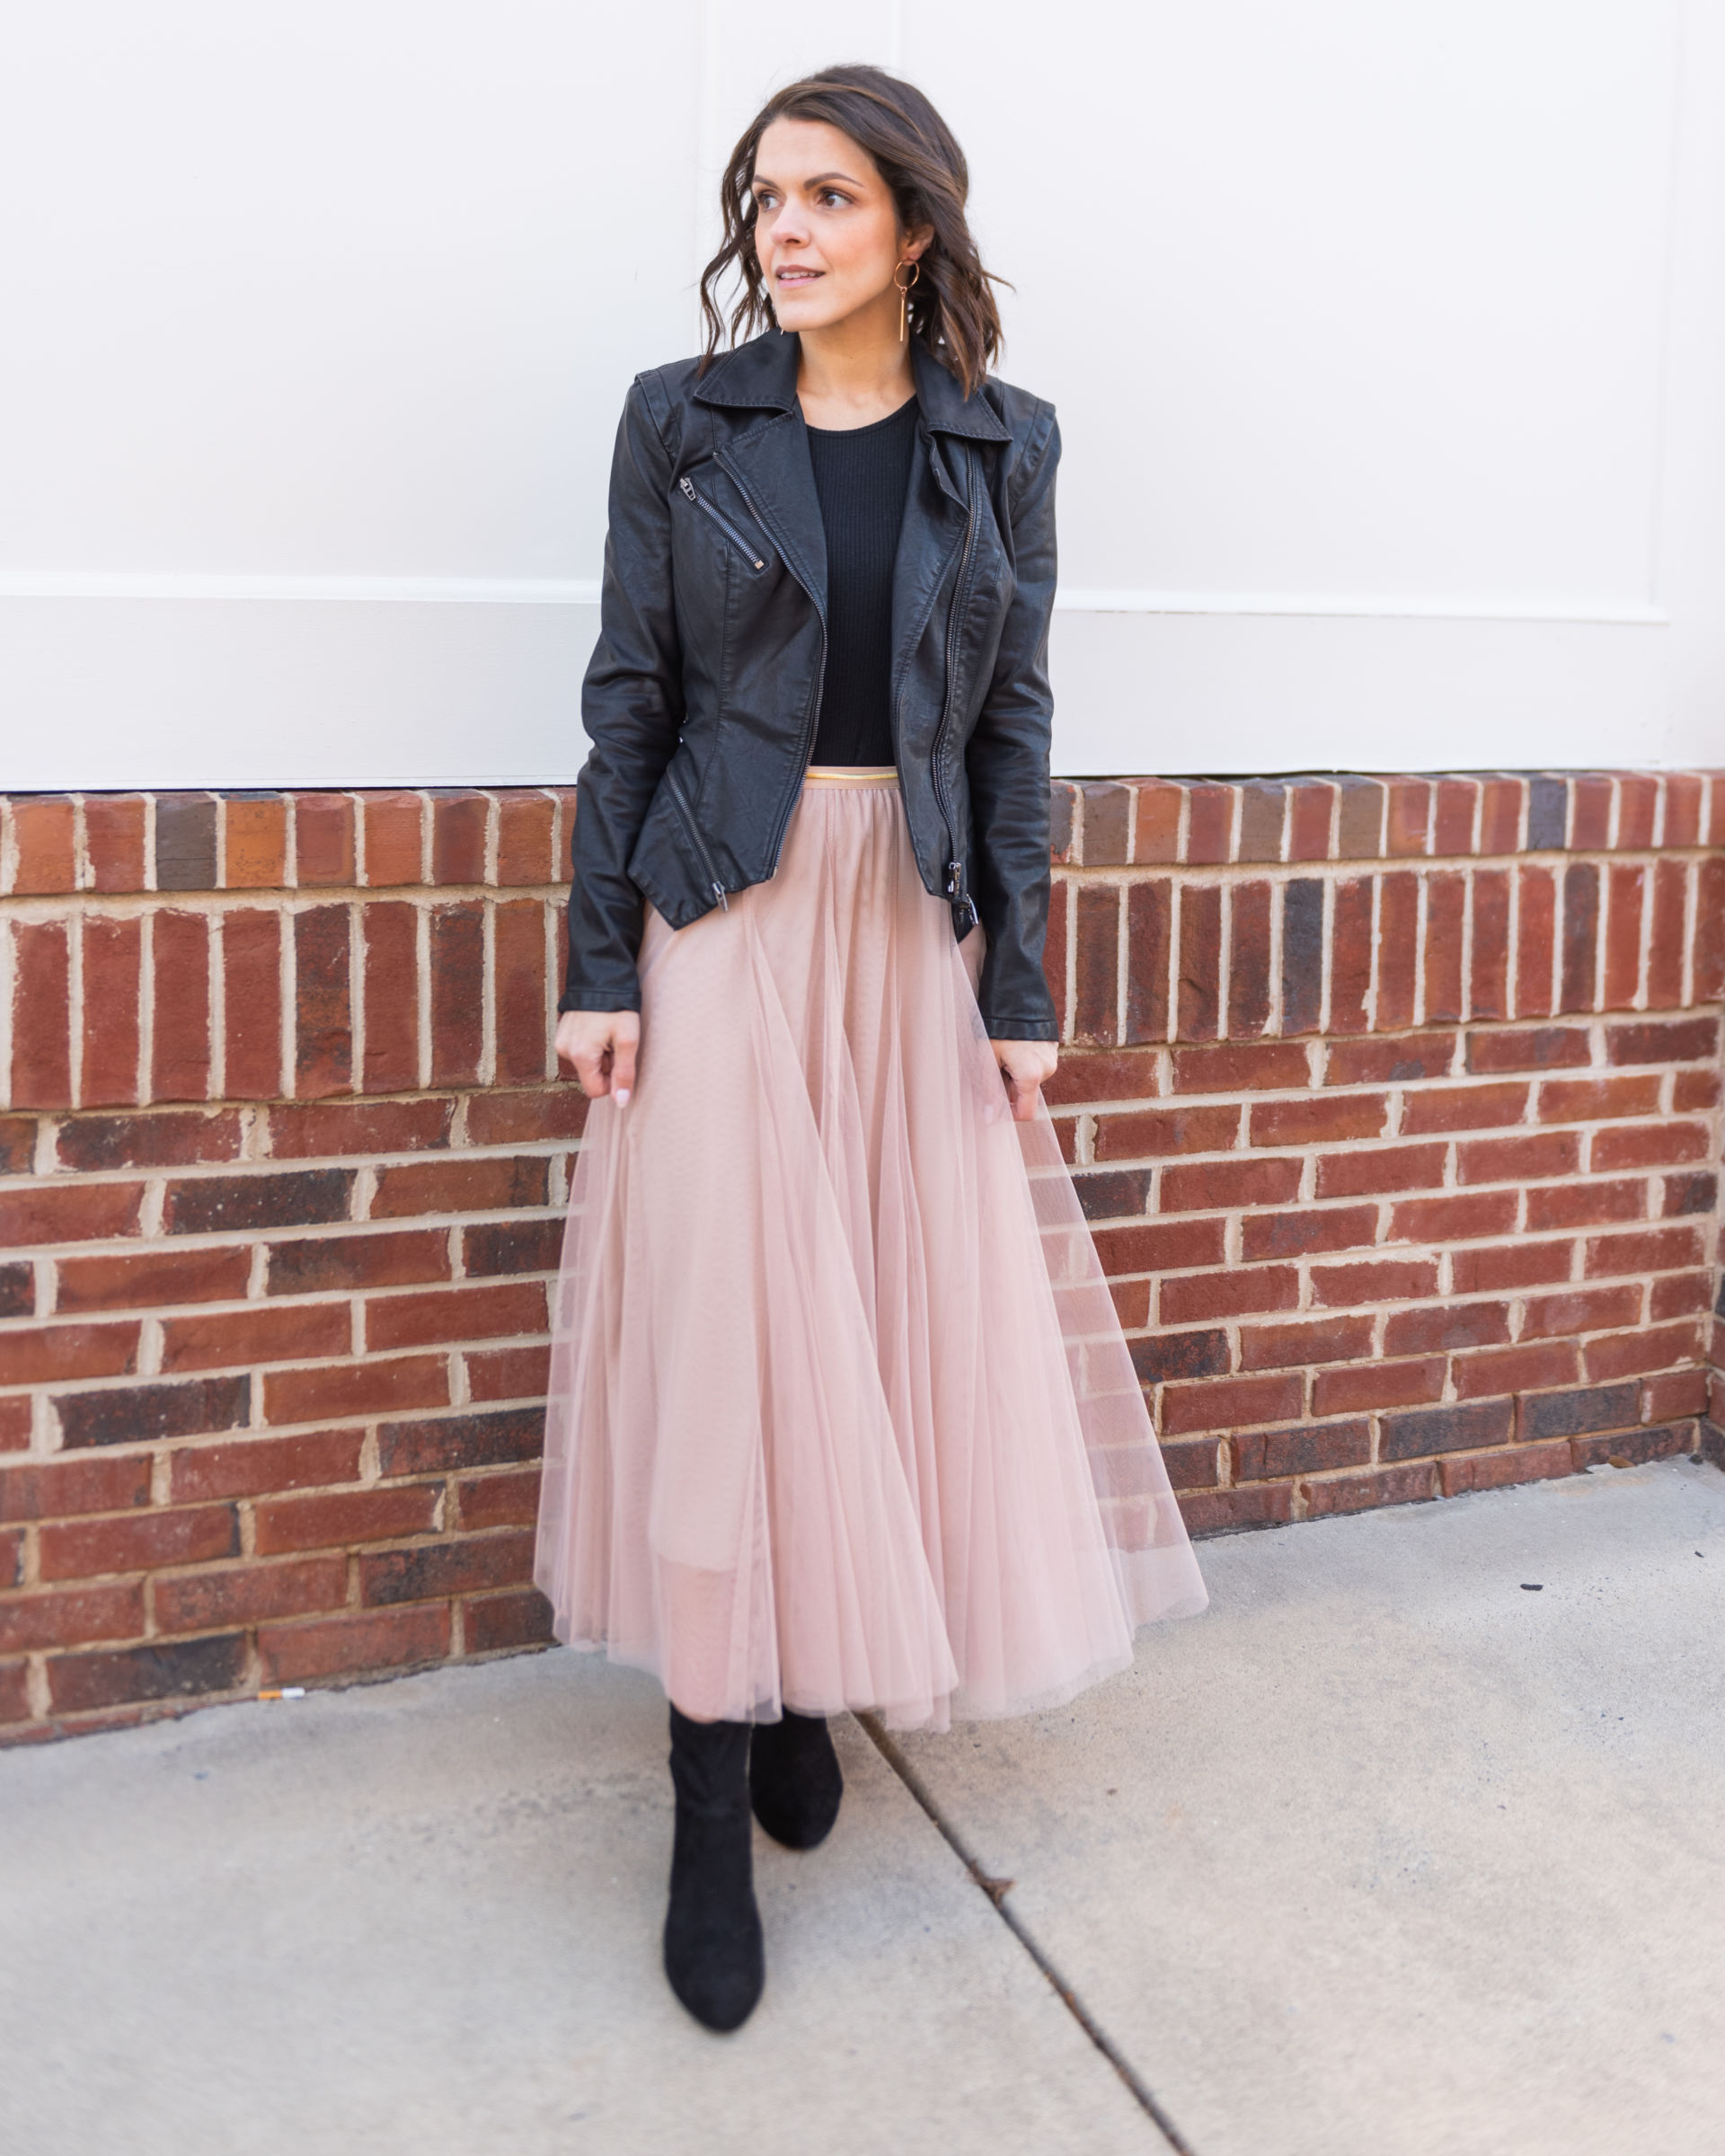 3 Ways To Style A Tulle Skirt The Sarah Stories 8231